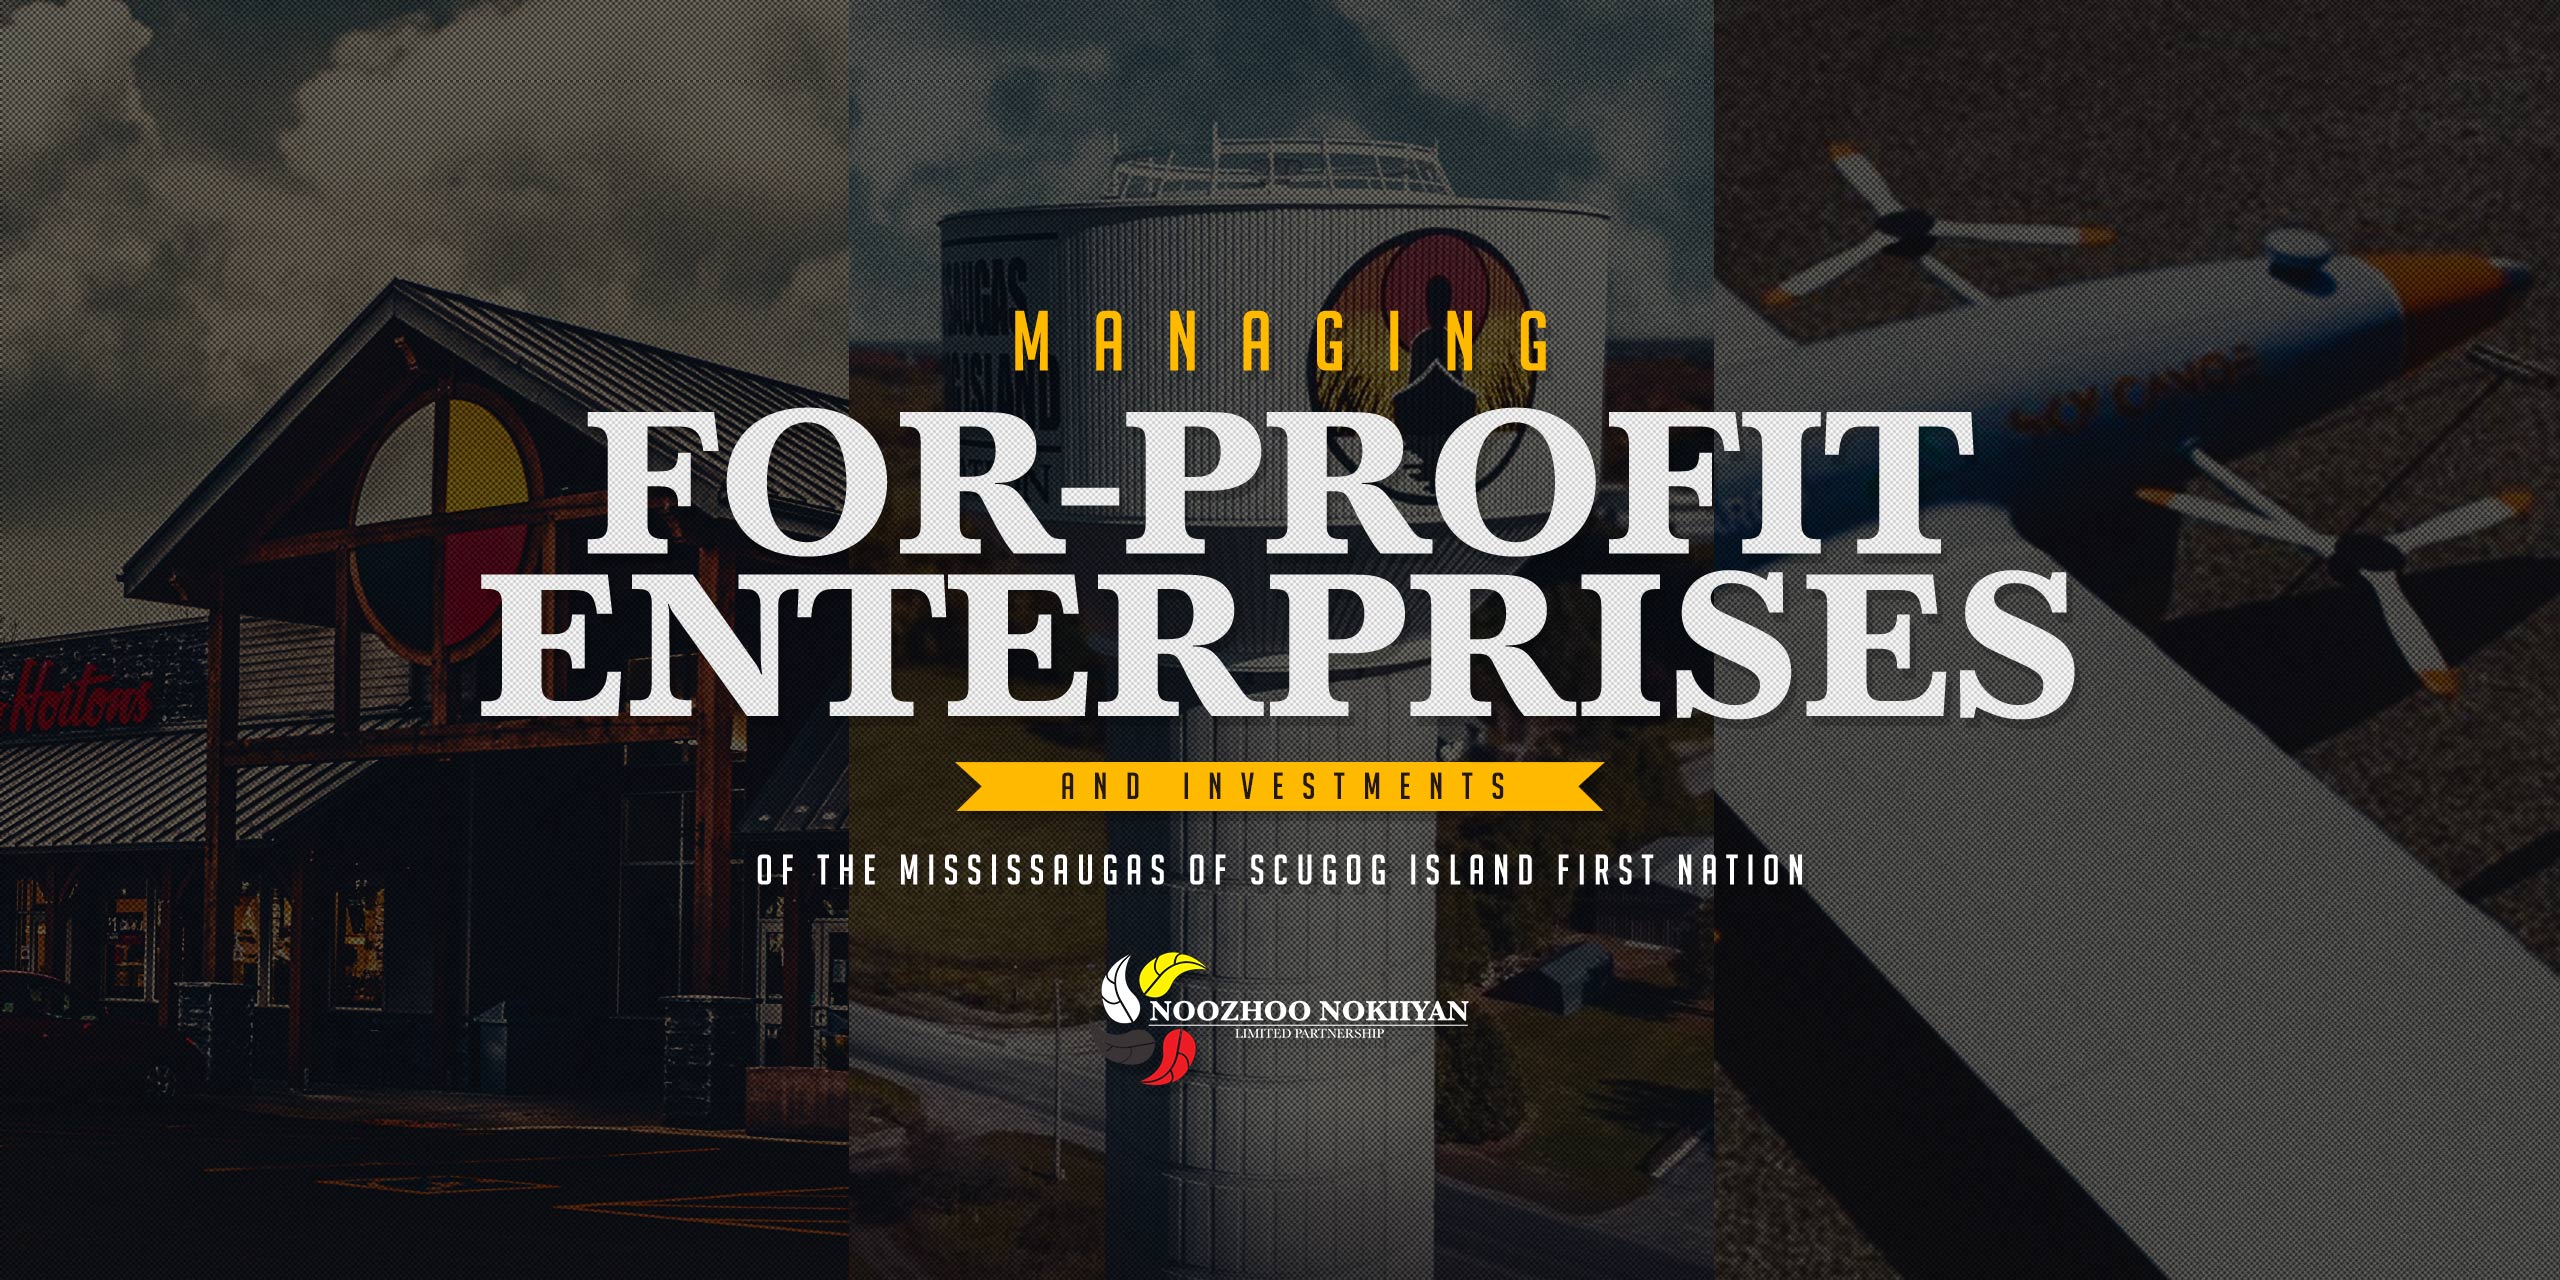 Managing the for-profit enterprises and investments of the Mississaugas of Scugog Island First Nation